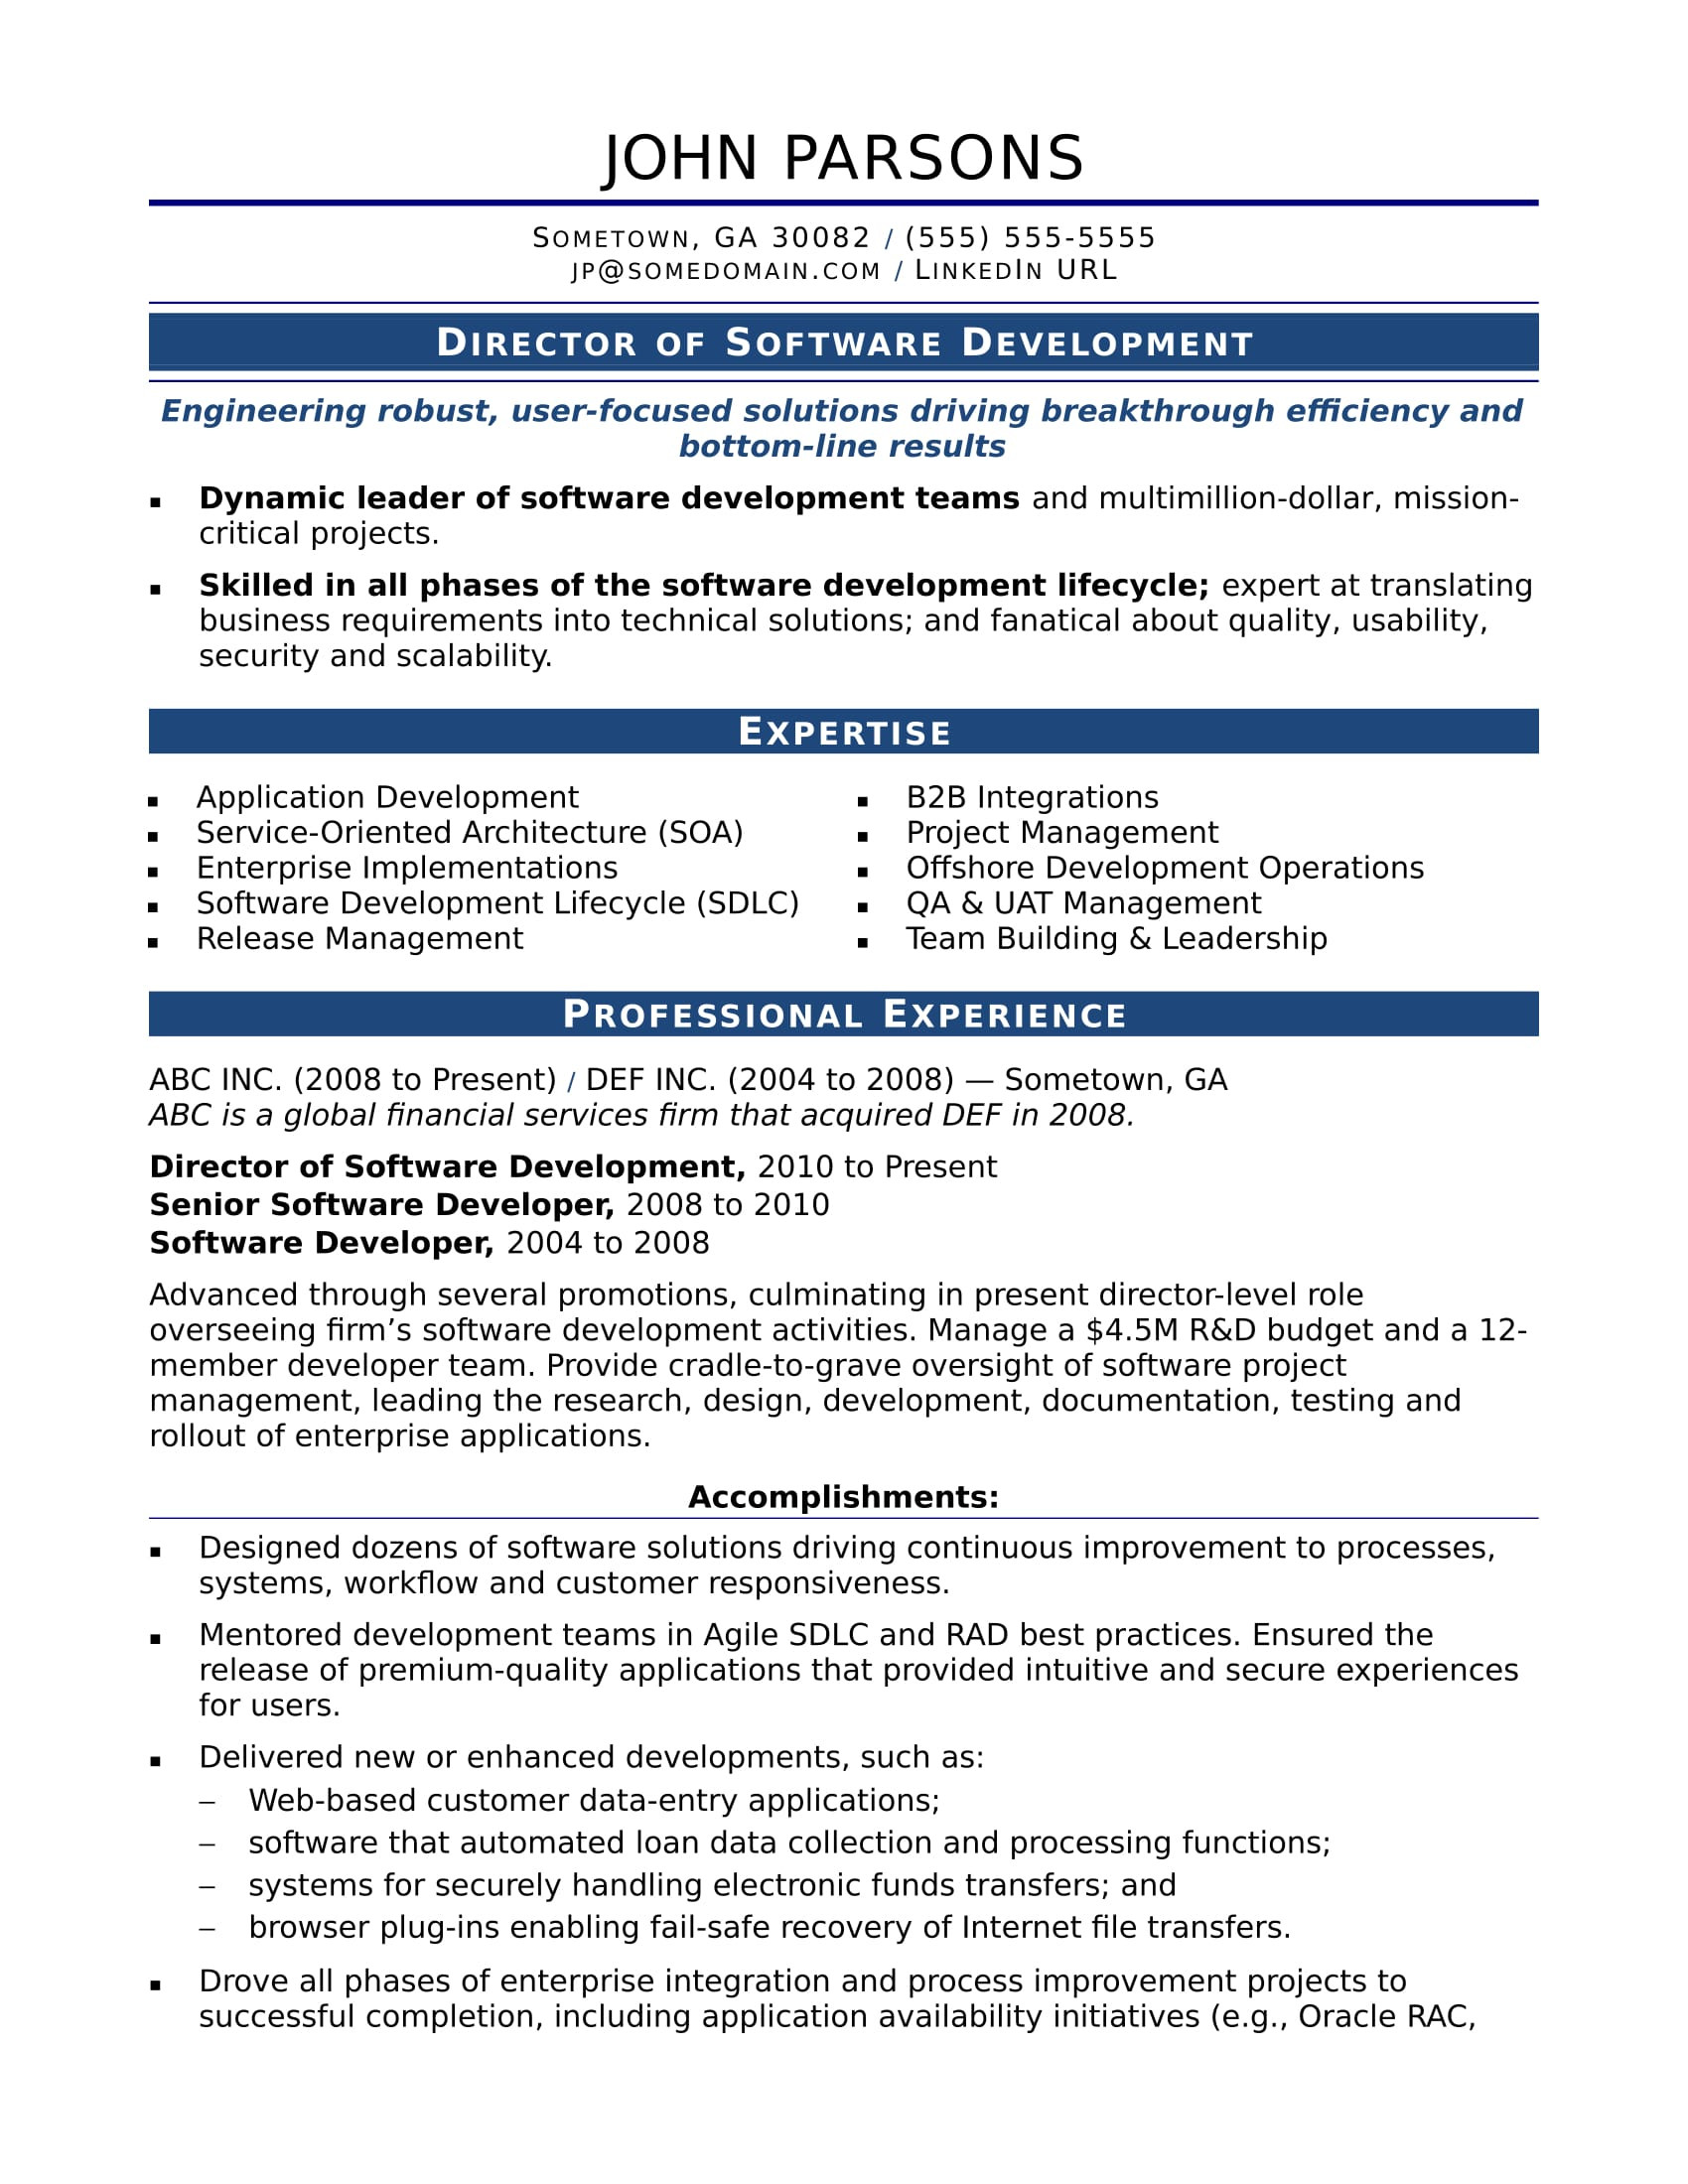 Resume Template for 2 Years Experience Sample Resume for An Experienced It Developer Monster.com